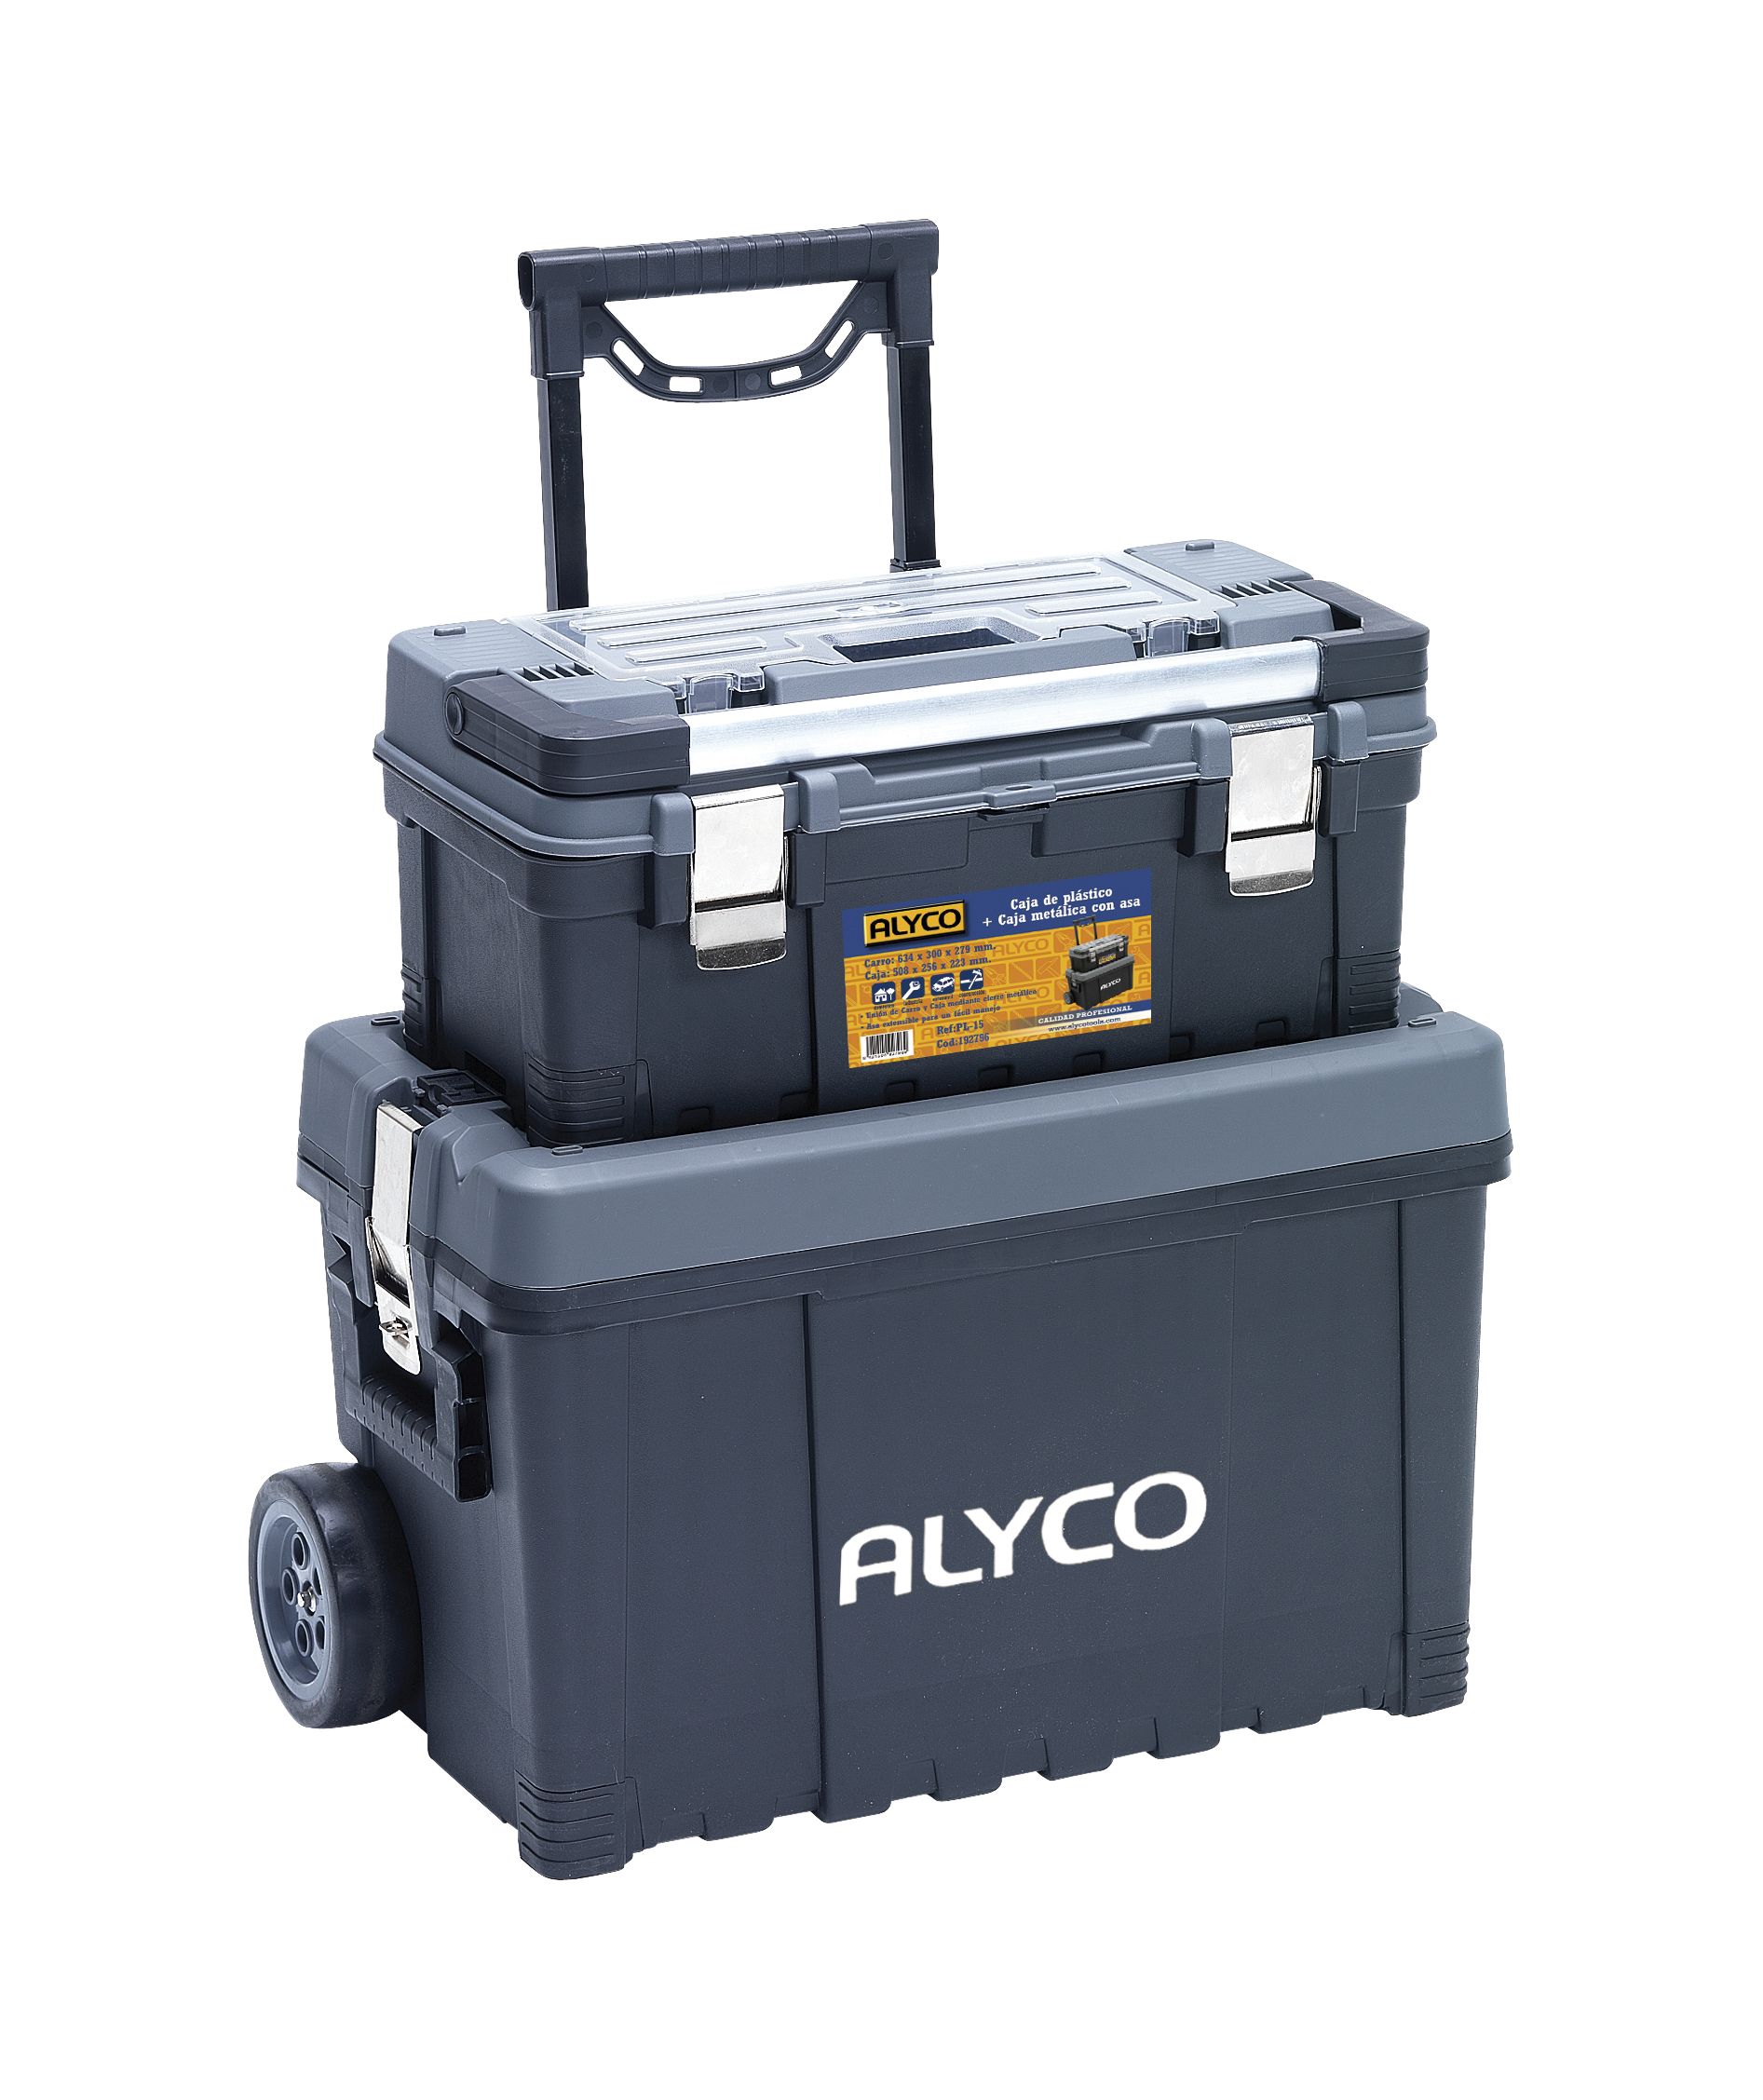 Large Plastic Box With Plastic Tool Box ALYCO, Products